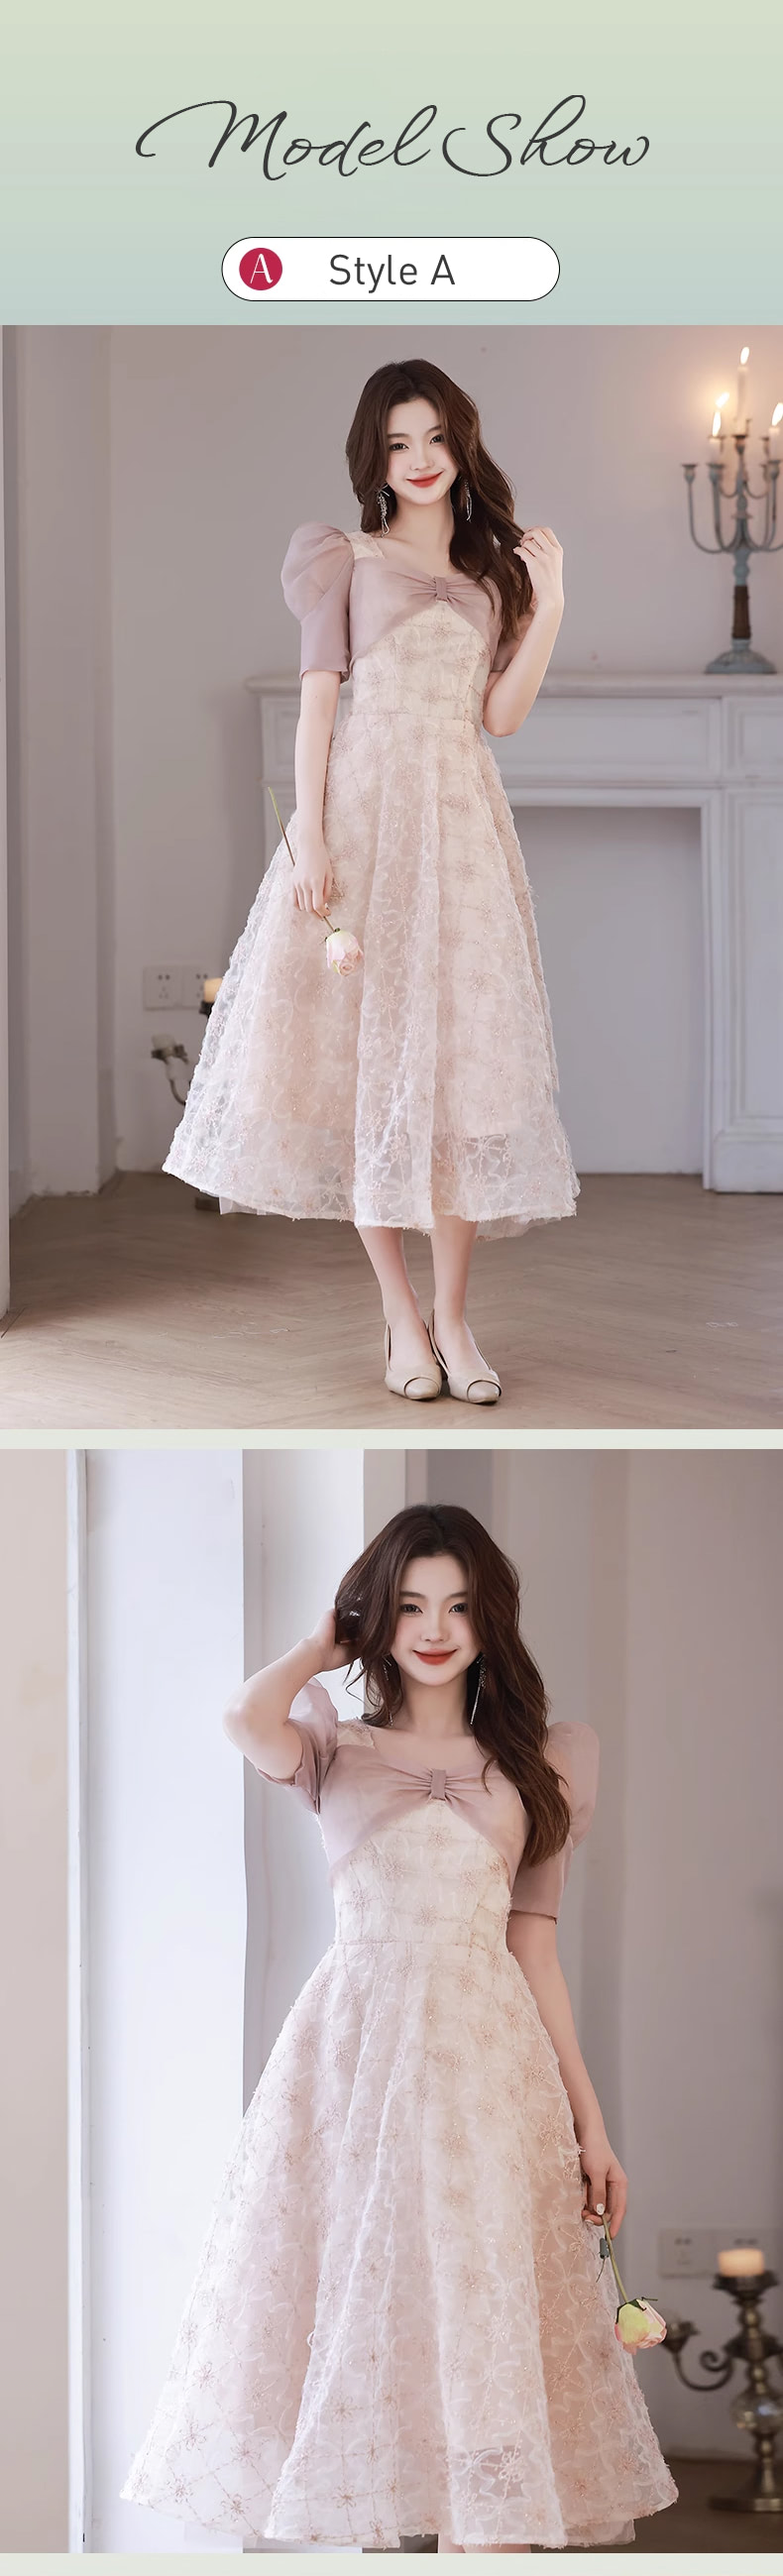 Fairy-Pink-Floral-Bridesmaid-Midi-Dress-Wedding-Guest-Party-Ball-Gown16